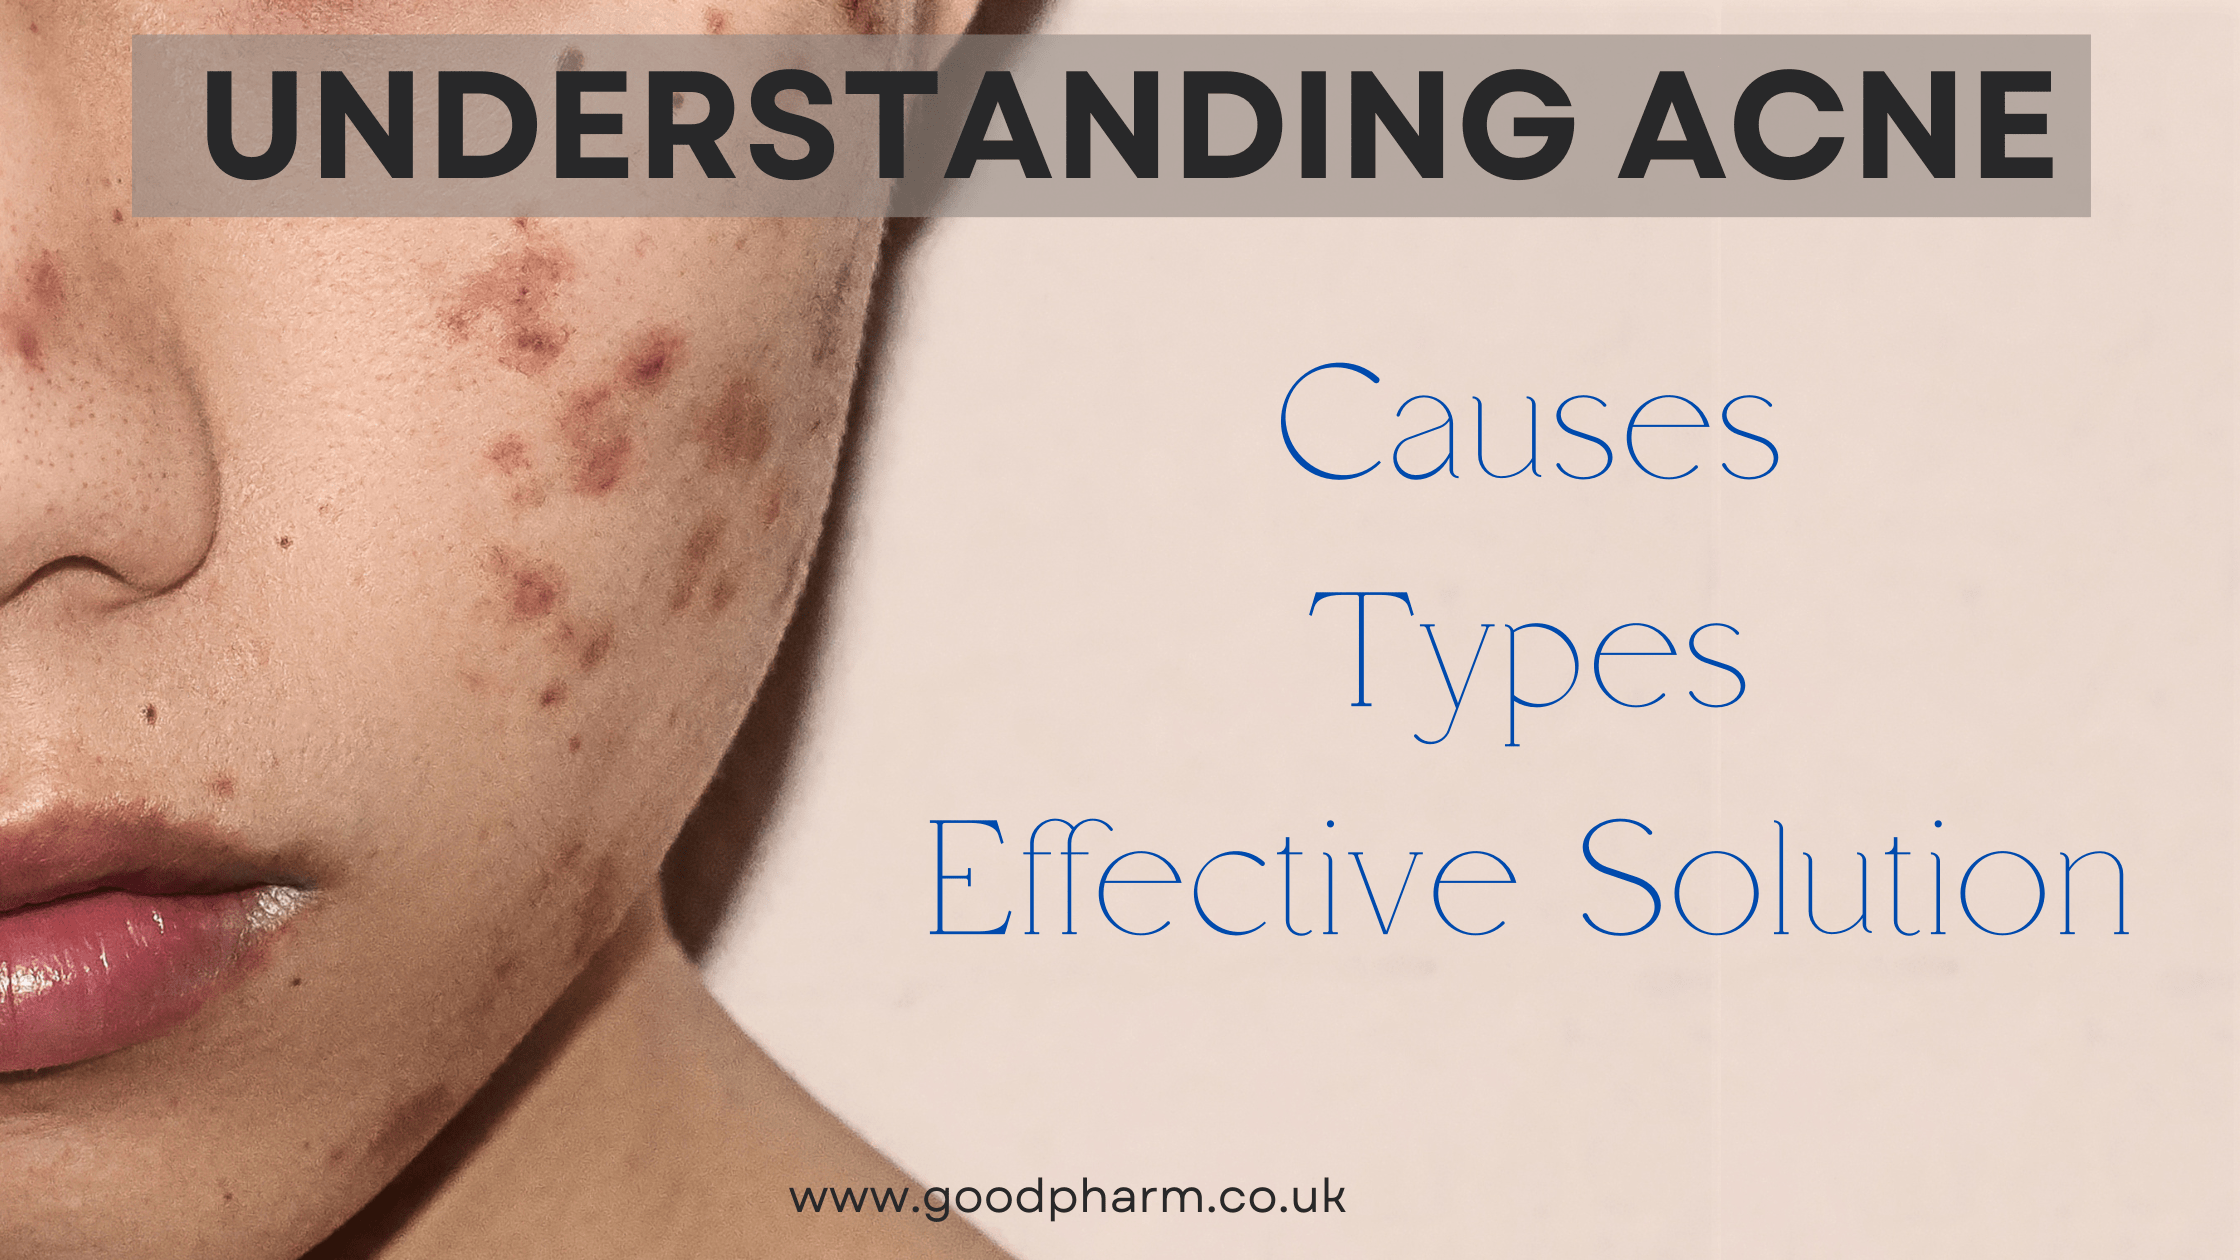 Understanding Acne: Causes, Types, and Effective Solutions